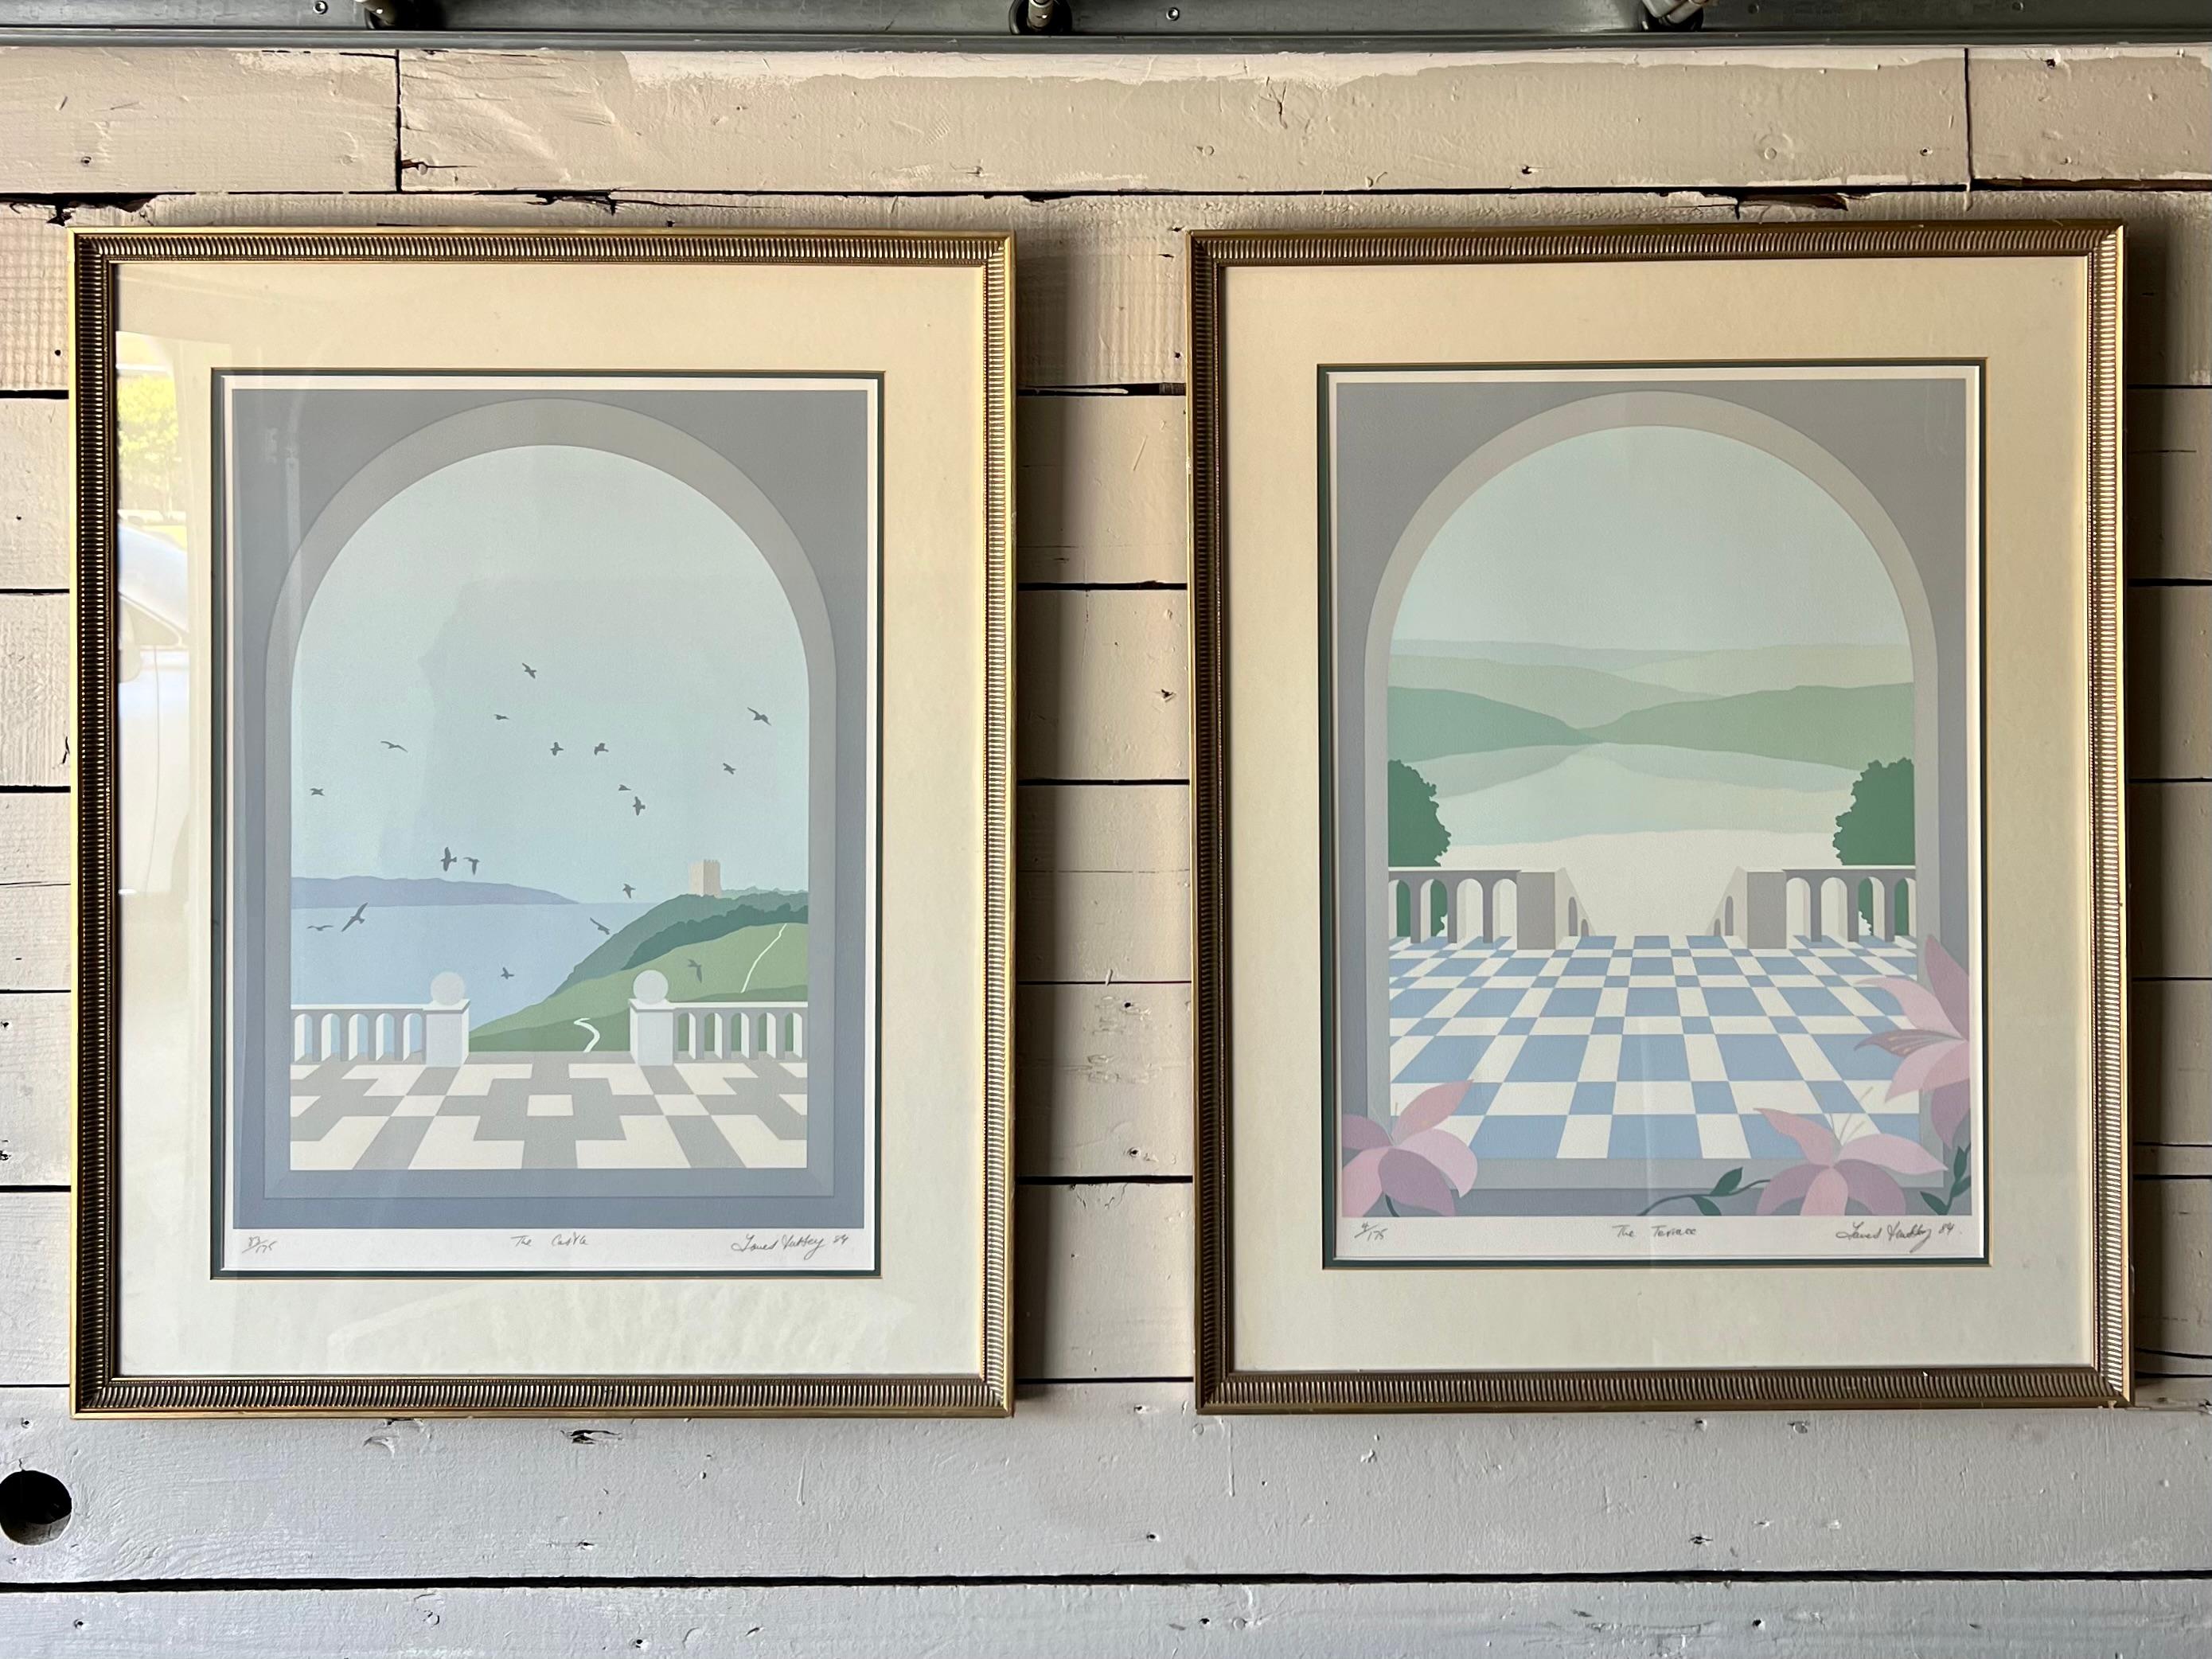 Pair of exquisite post modern framed lithographs by James Hussey. Both numbered and dated 1984. Professionally framed in matching antiqued gold frames. A bit of wear to the frames but at the top portions of the frames so not visible when mounted on